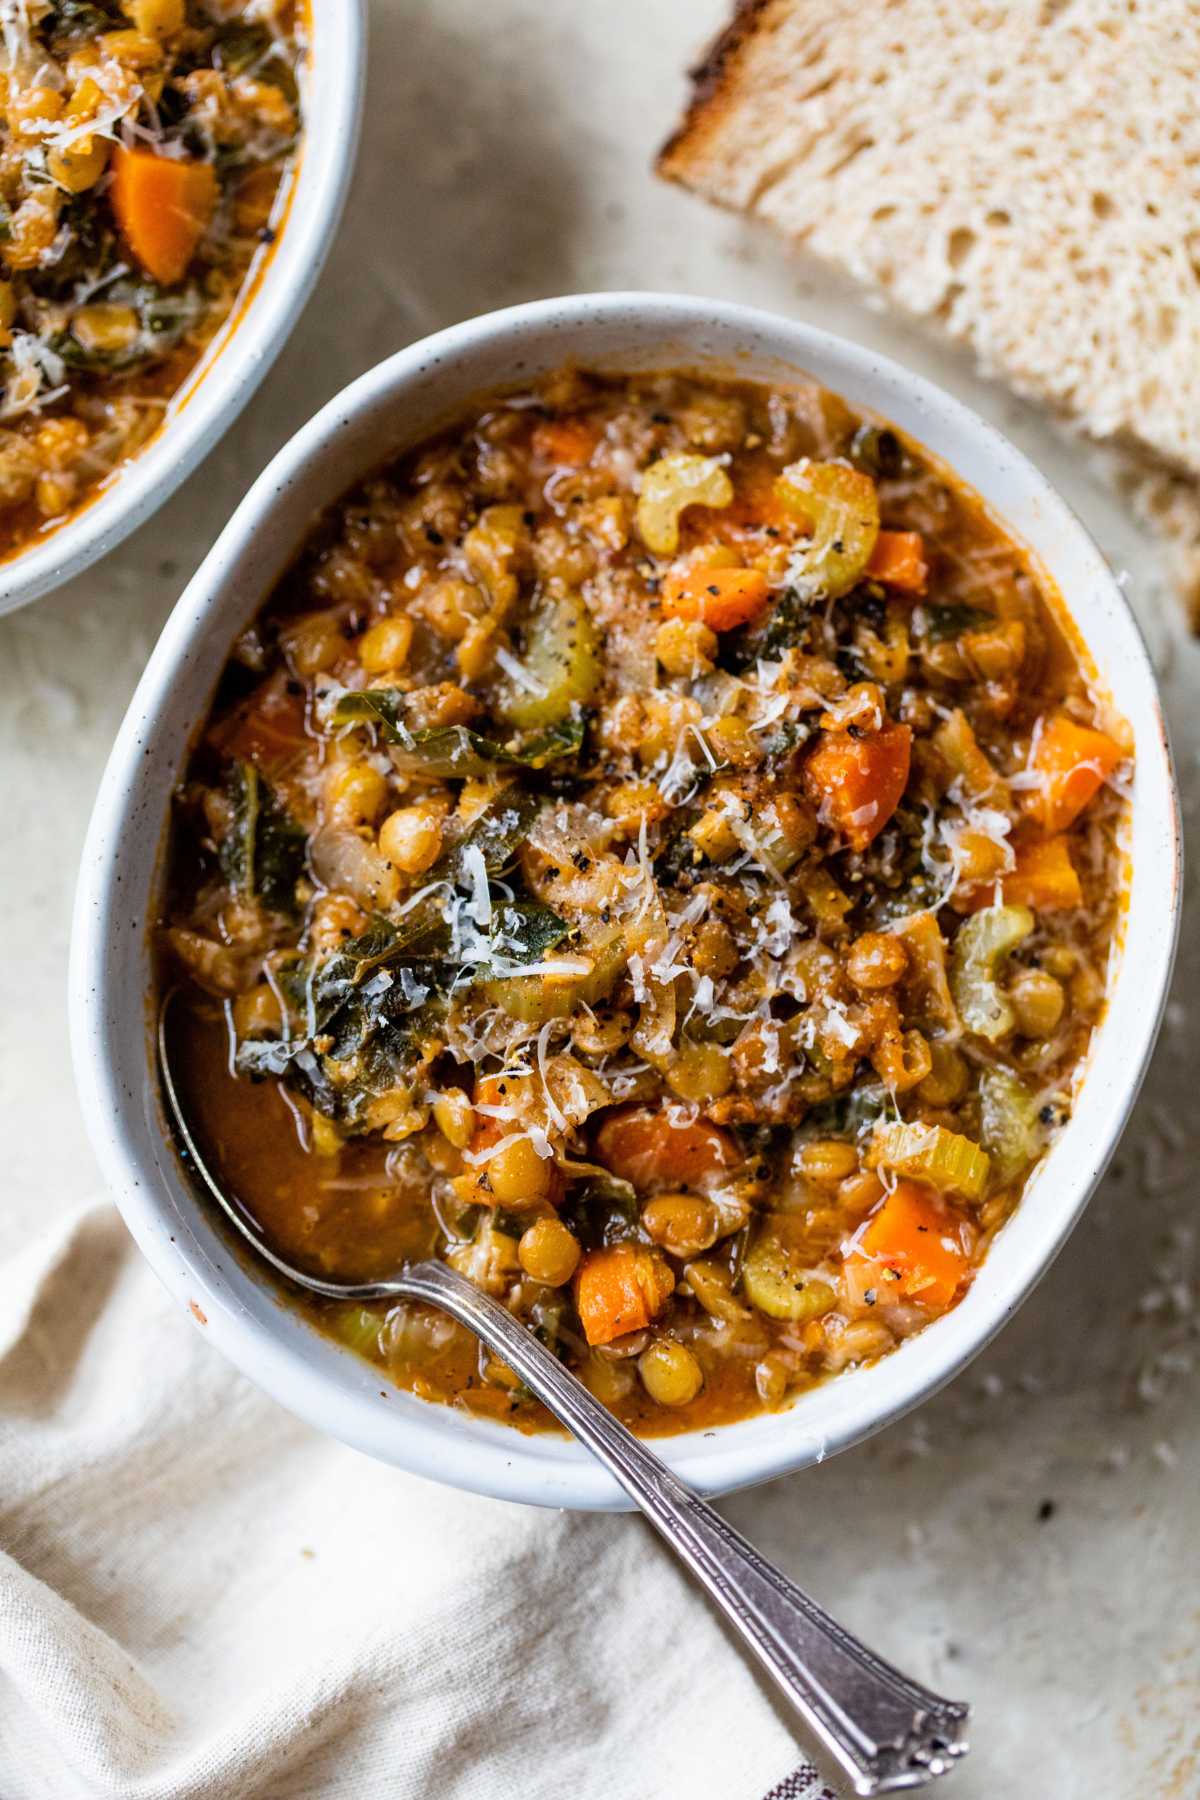 Green lentil soup made with veggies in a white bowl with a spoon.